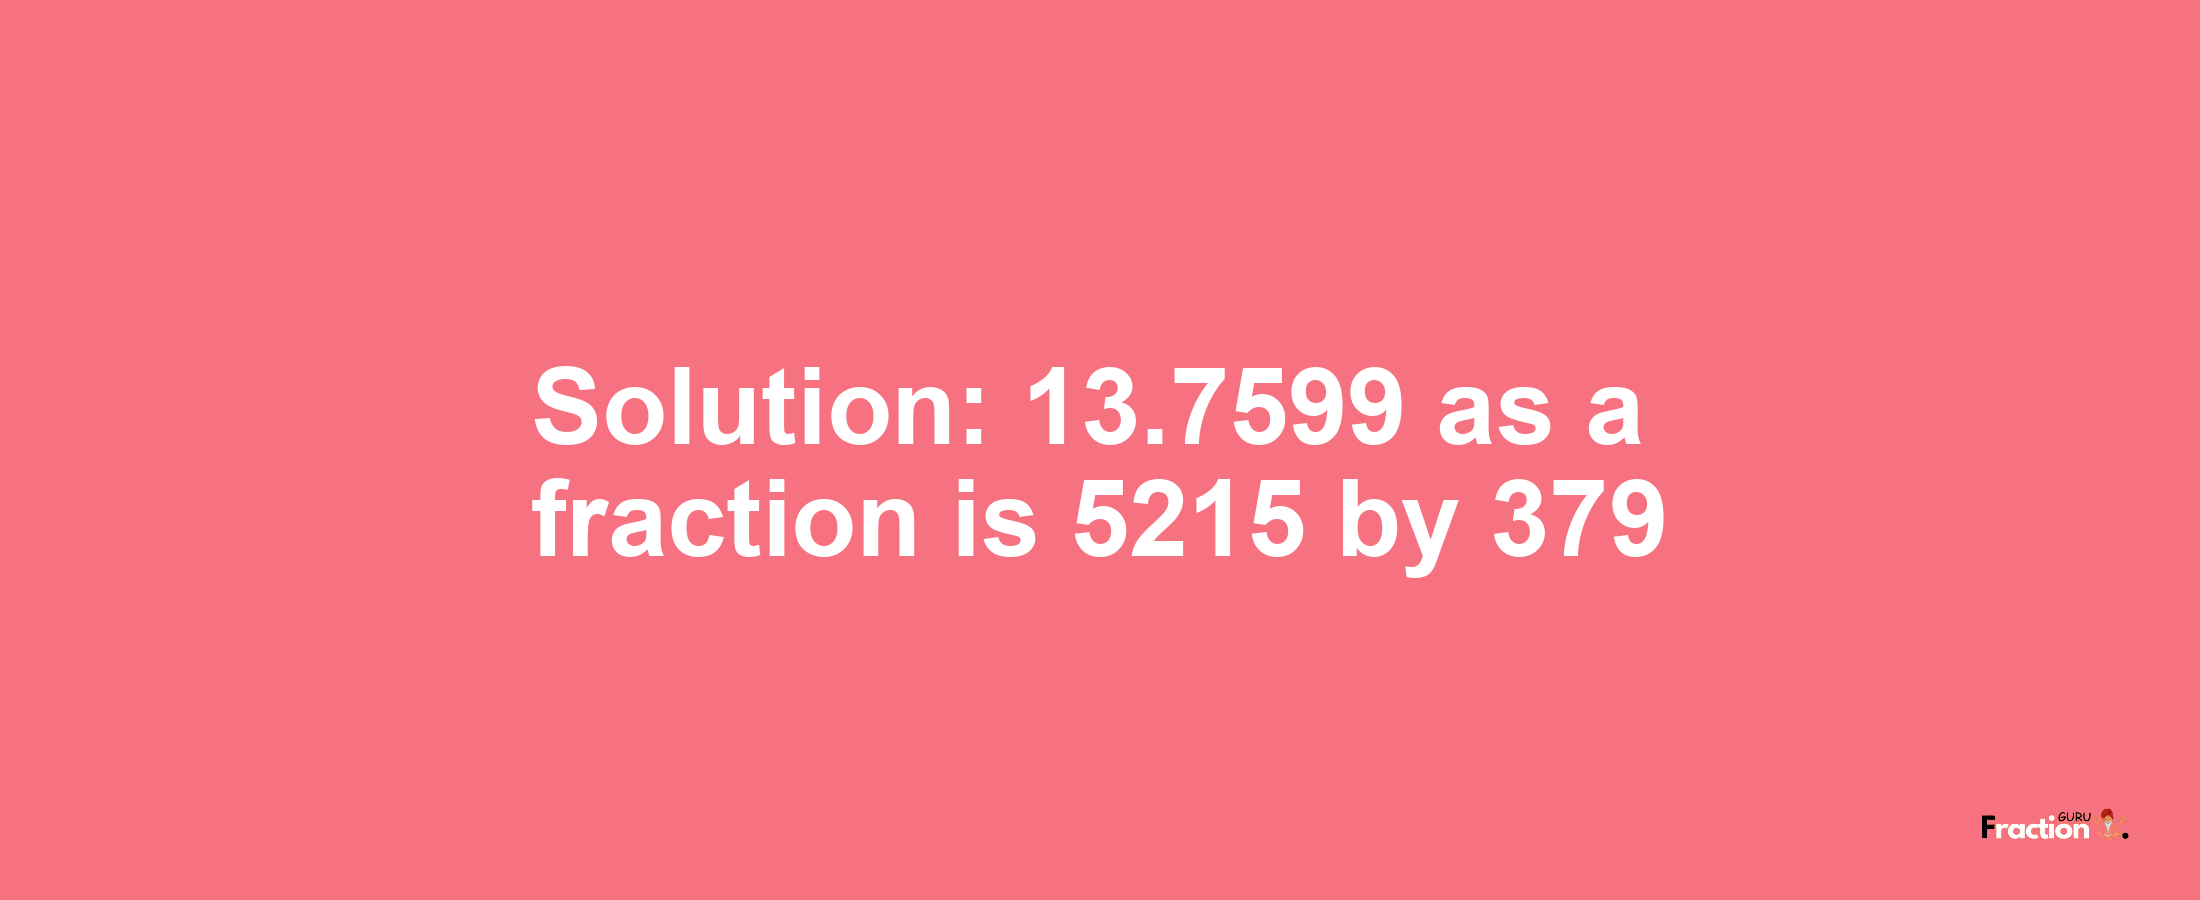 Solution:13.7599 as a fraction is 5215/379